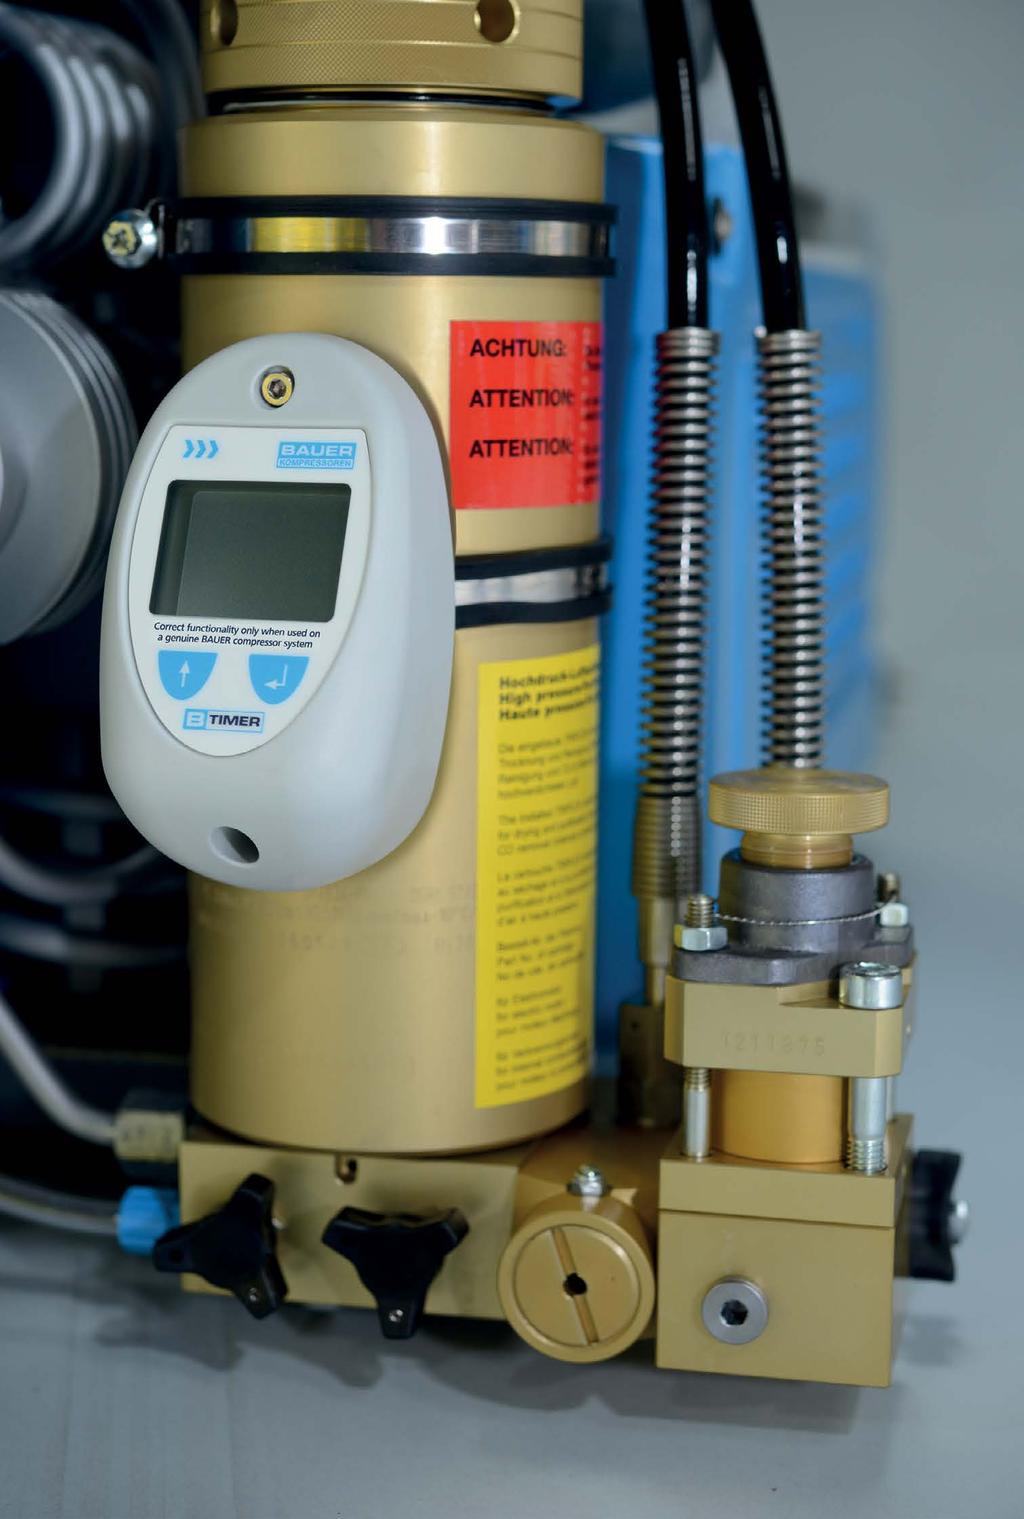 The B-TIMER is specifically designed for the operating operating characteristics and purification systems of BAUER compressors. Highly sensitive special sensor to monitor compressor starts and stops.